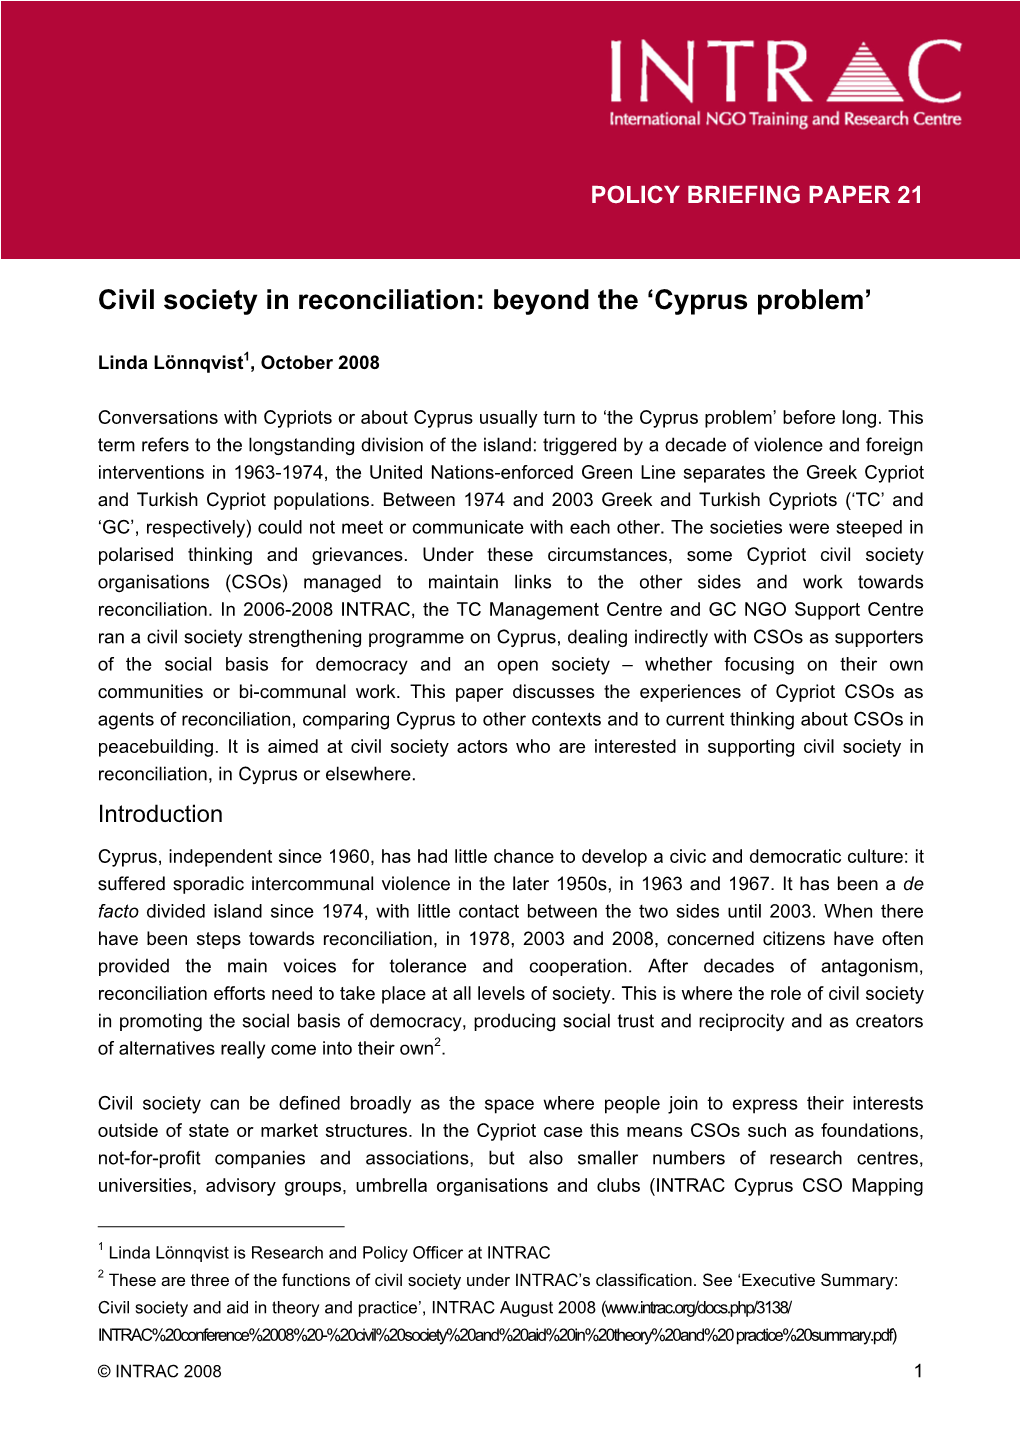 Civil Society in Reconciliation: Beyond the 'Cyprus Problem'